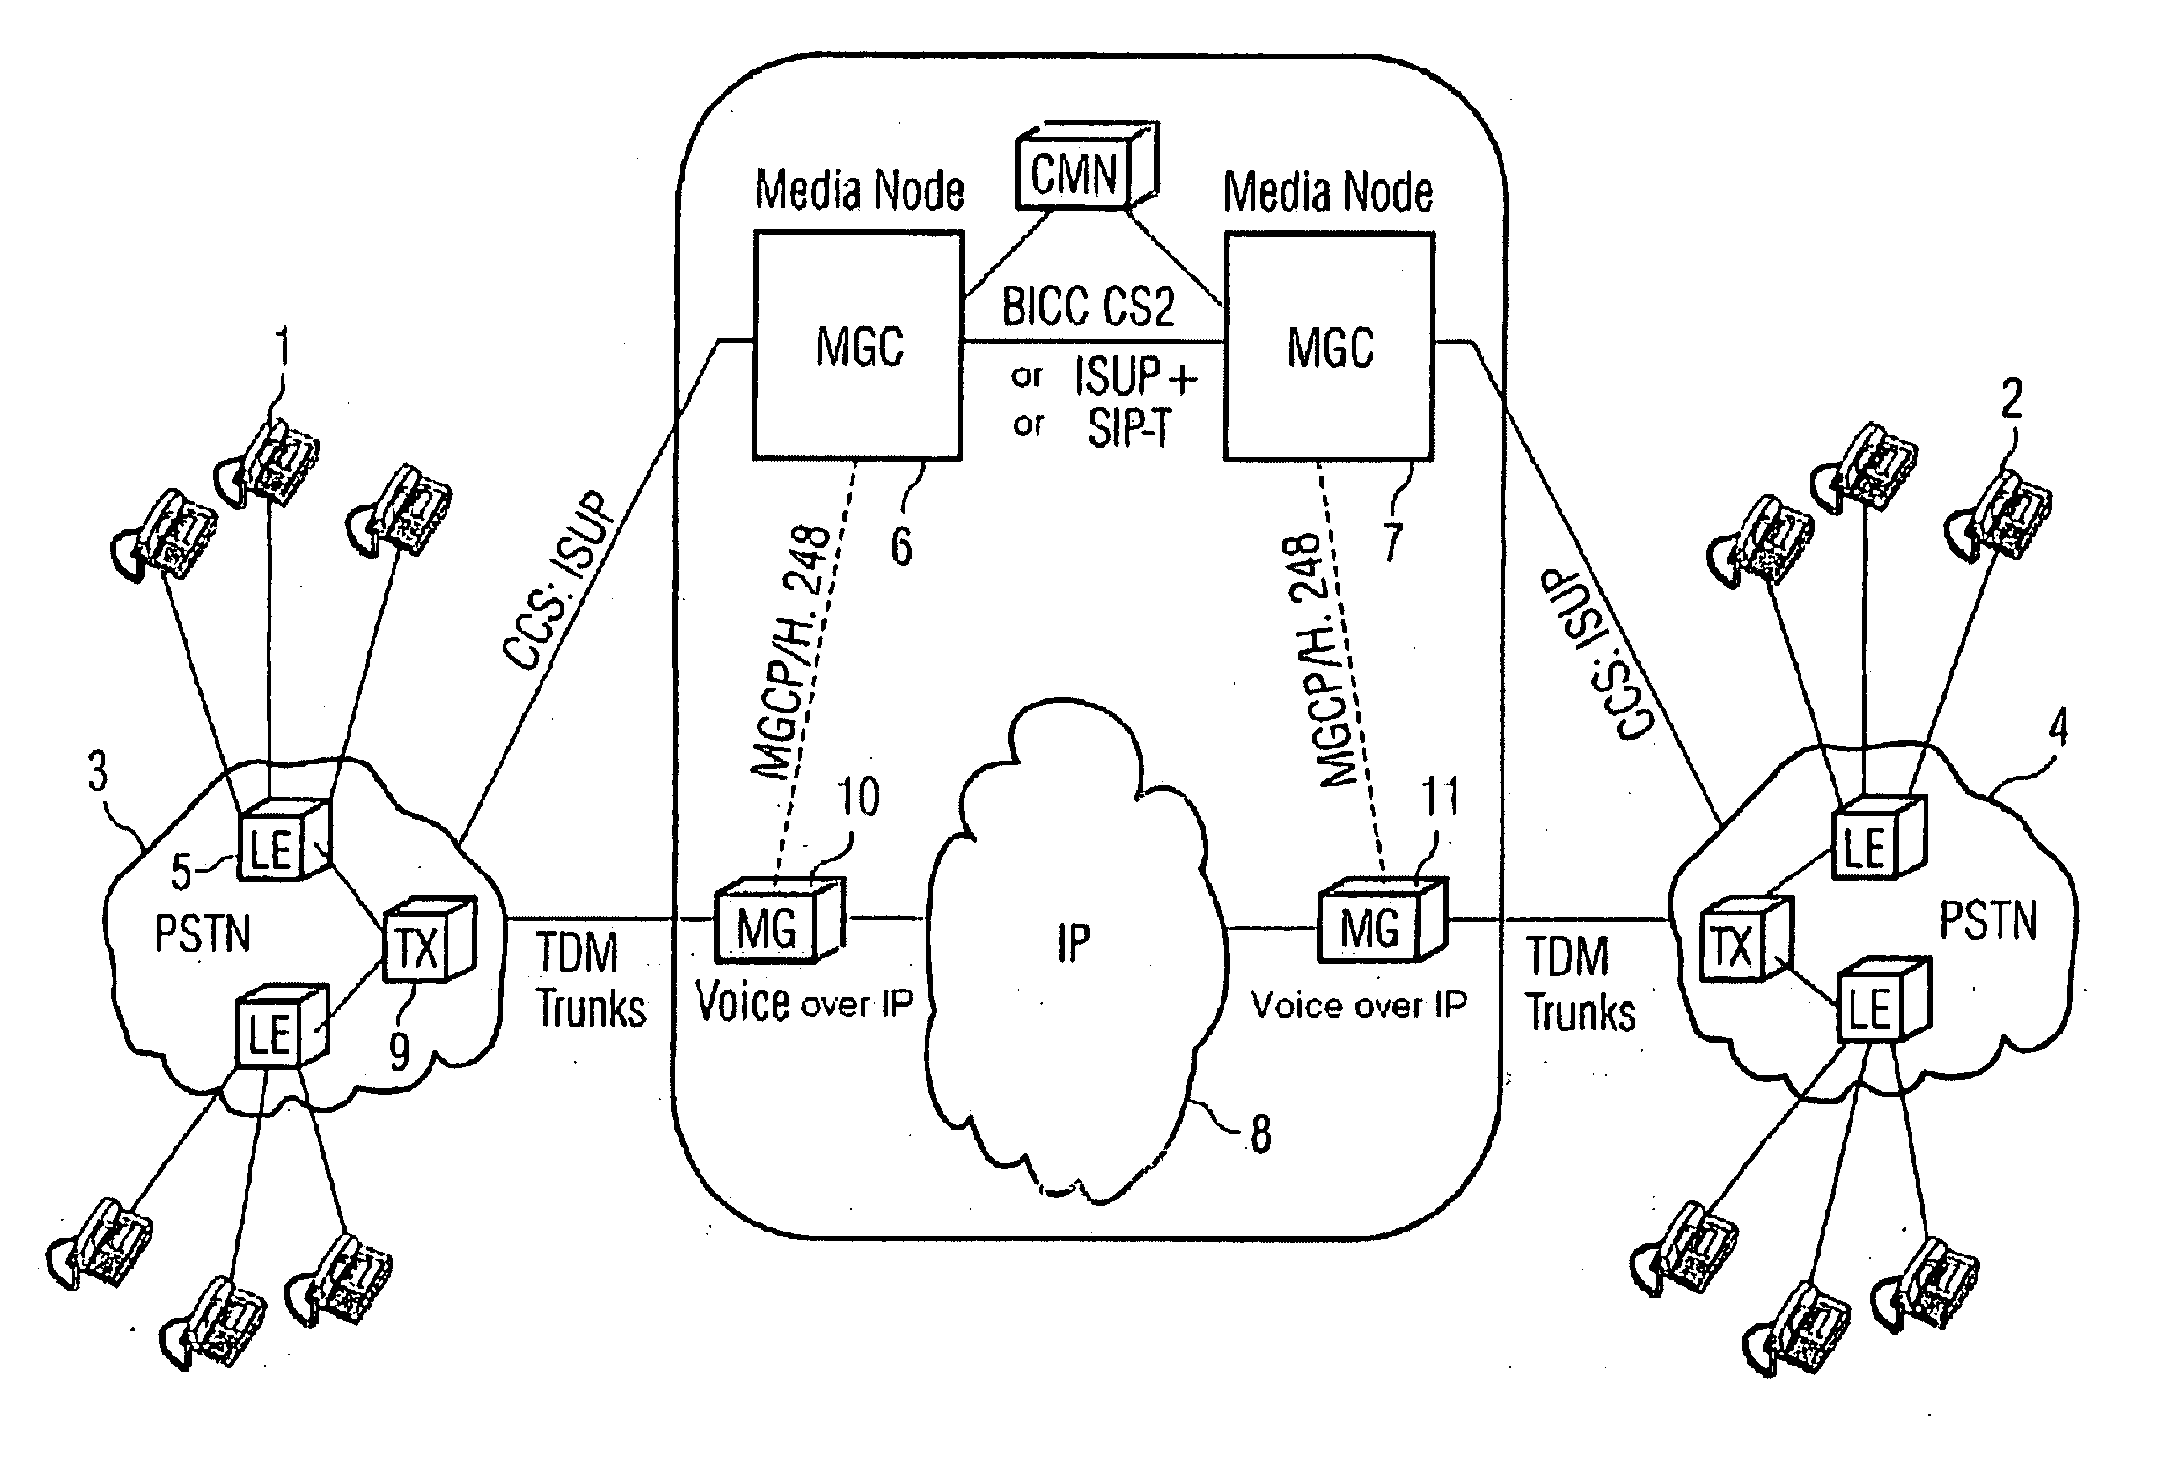 Method for providing a user interaction dialogue (uid) prior to connection acceptance by the called user